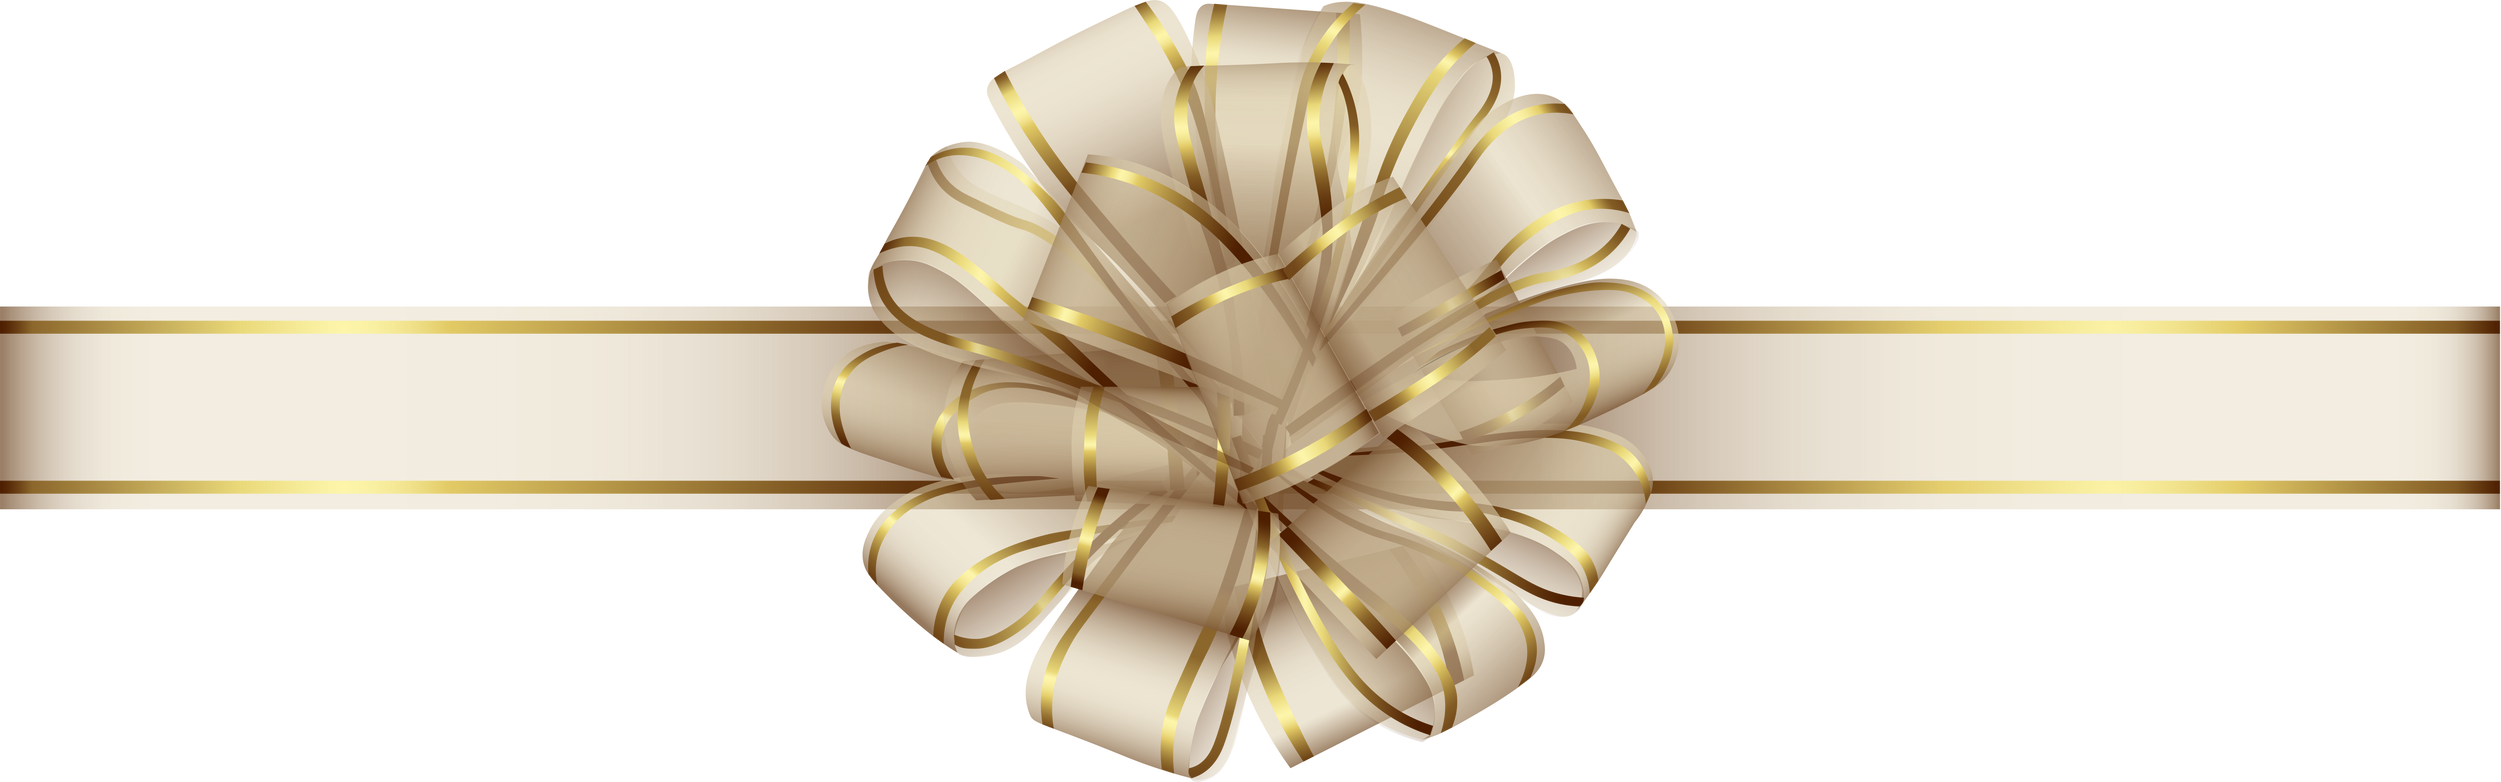 gold transparent bow and ribbon